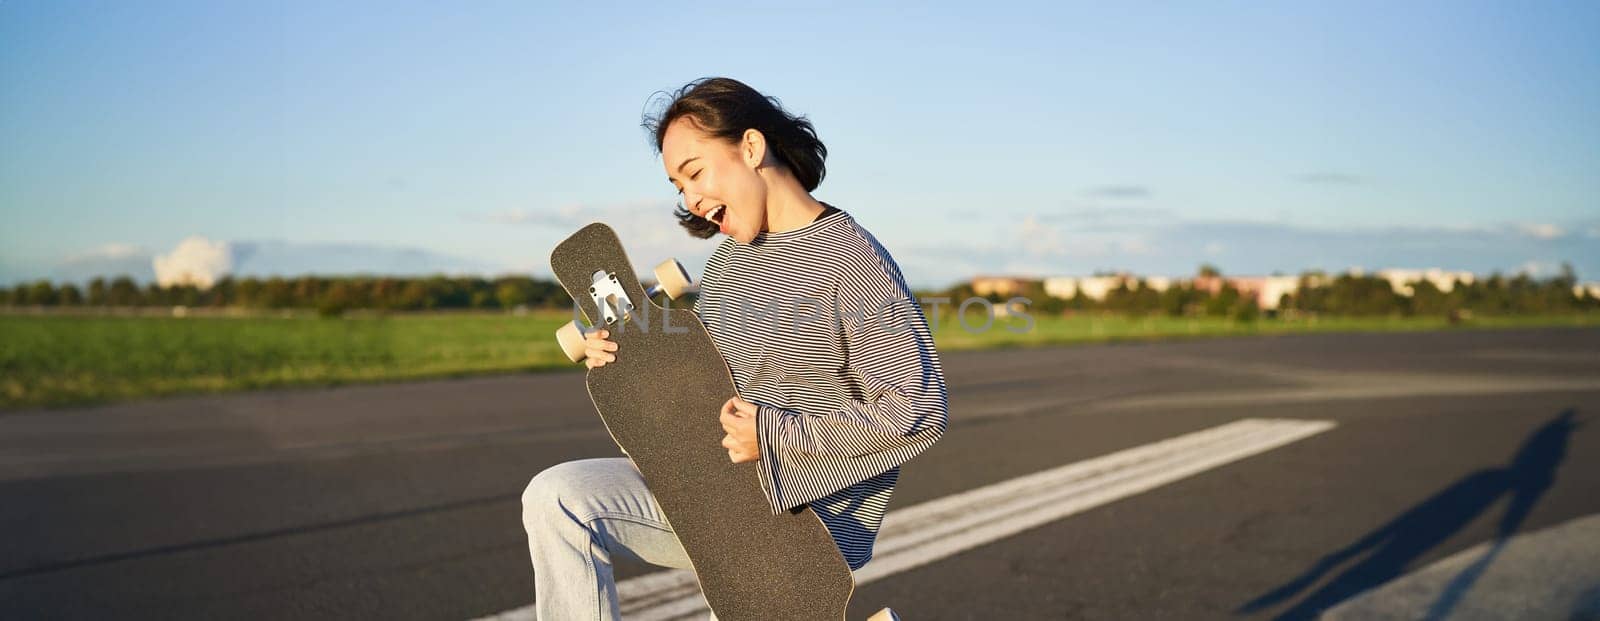 Beautiful asian teen girl playing with her longboard, holding skateboard as if playing guitar, standing on road on sunny day.